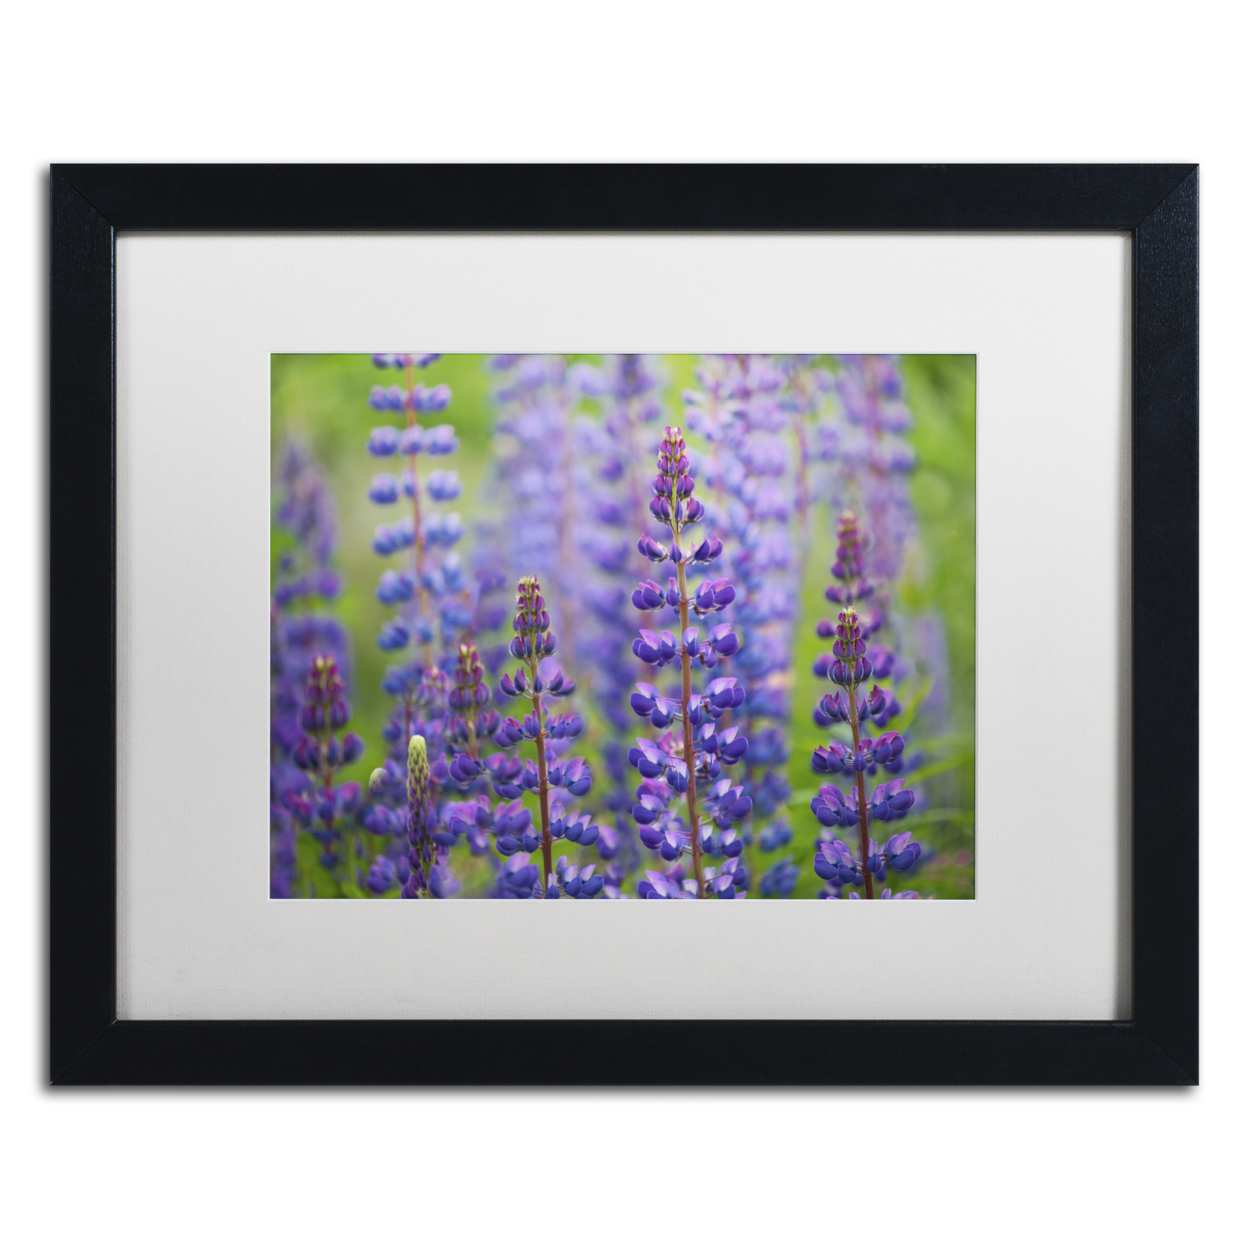 Cora Niele 'Blue Lupine Flowers' Black Wooden Framed Art 18 X 22 Inches